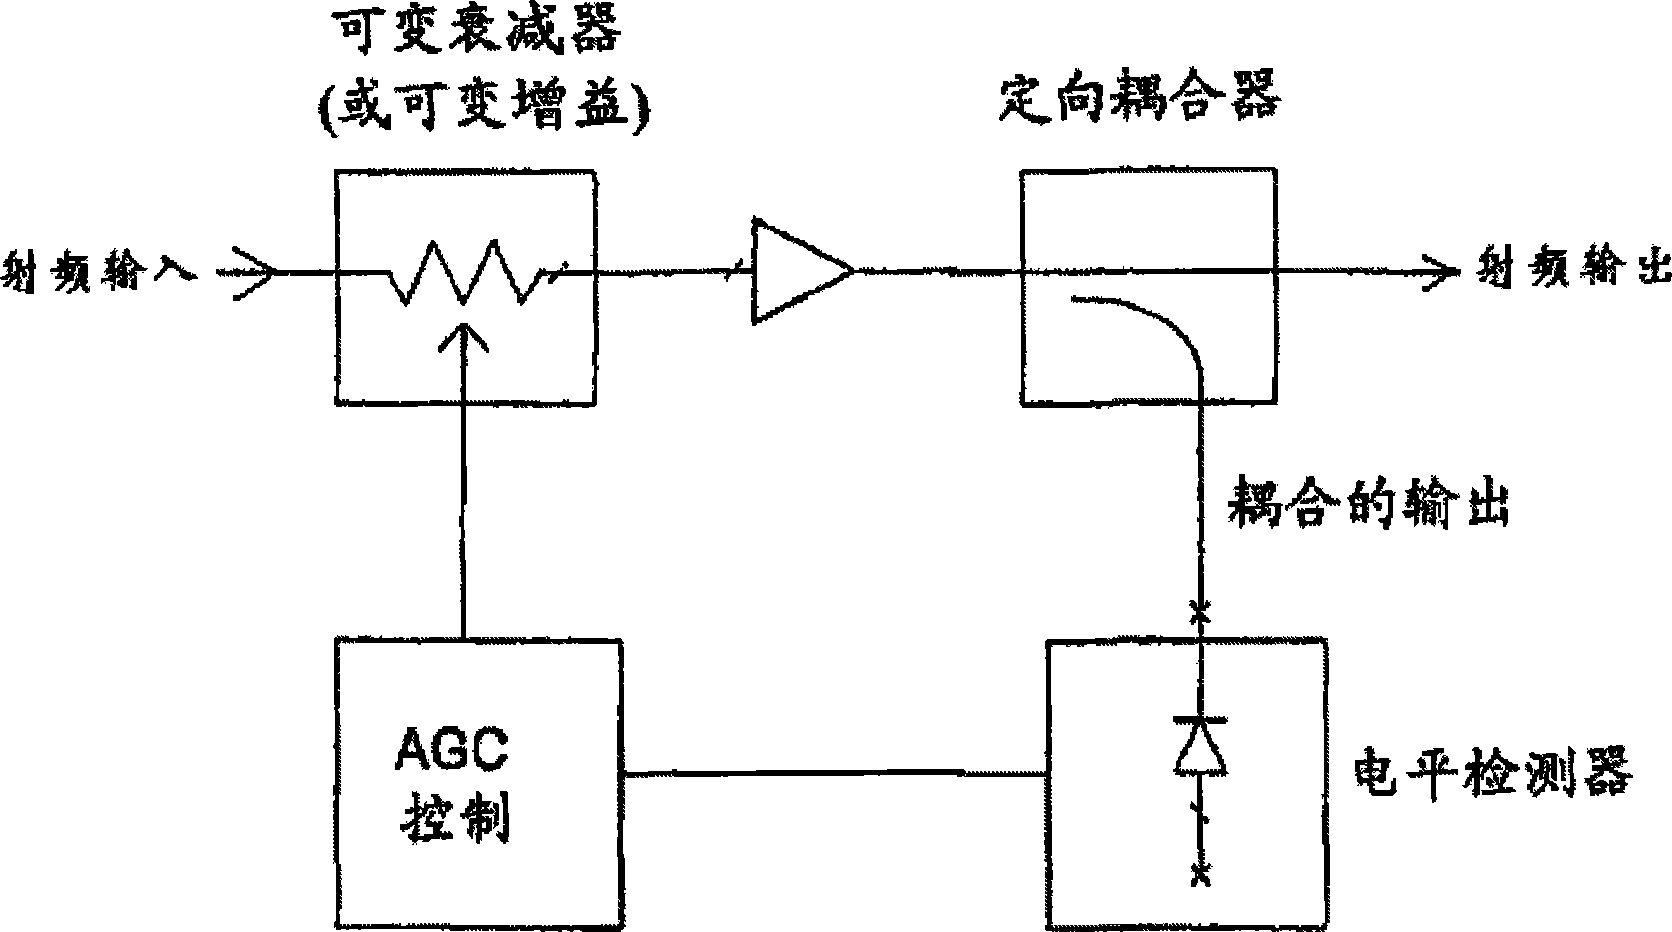 Light control automatic gain control circuit applied on cable television network optical receiver